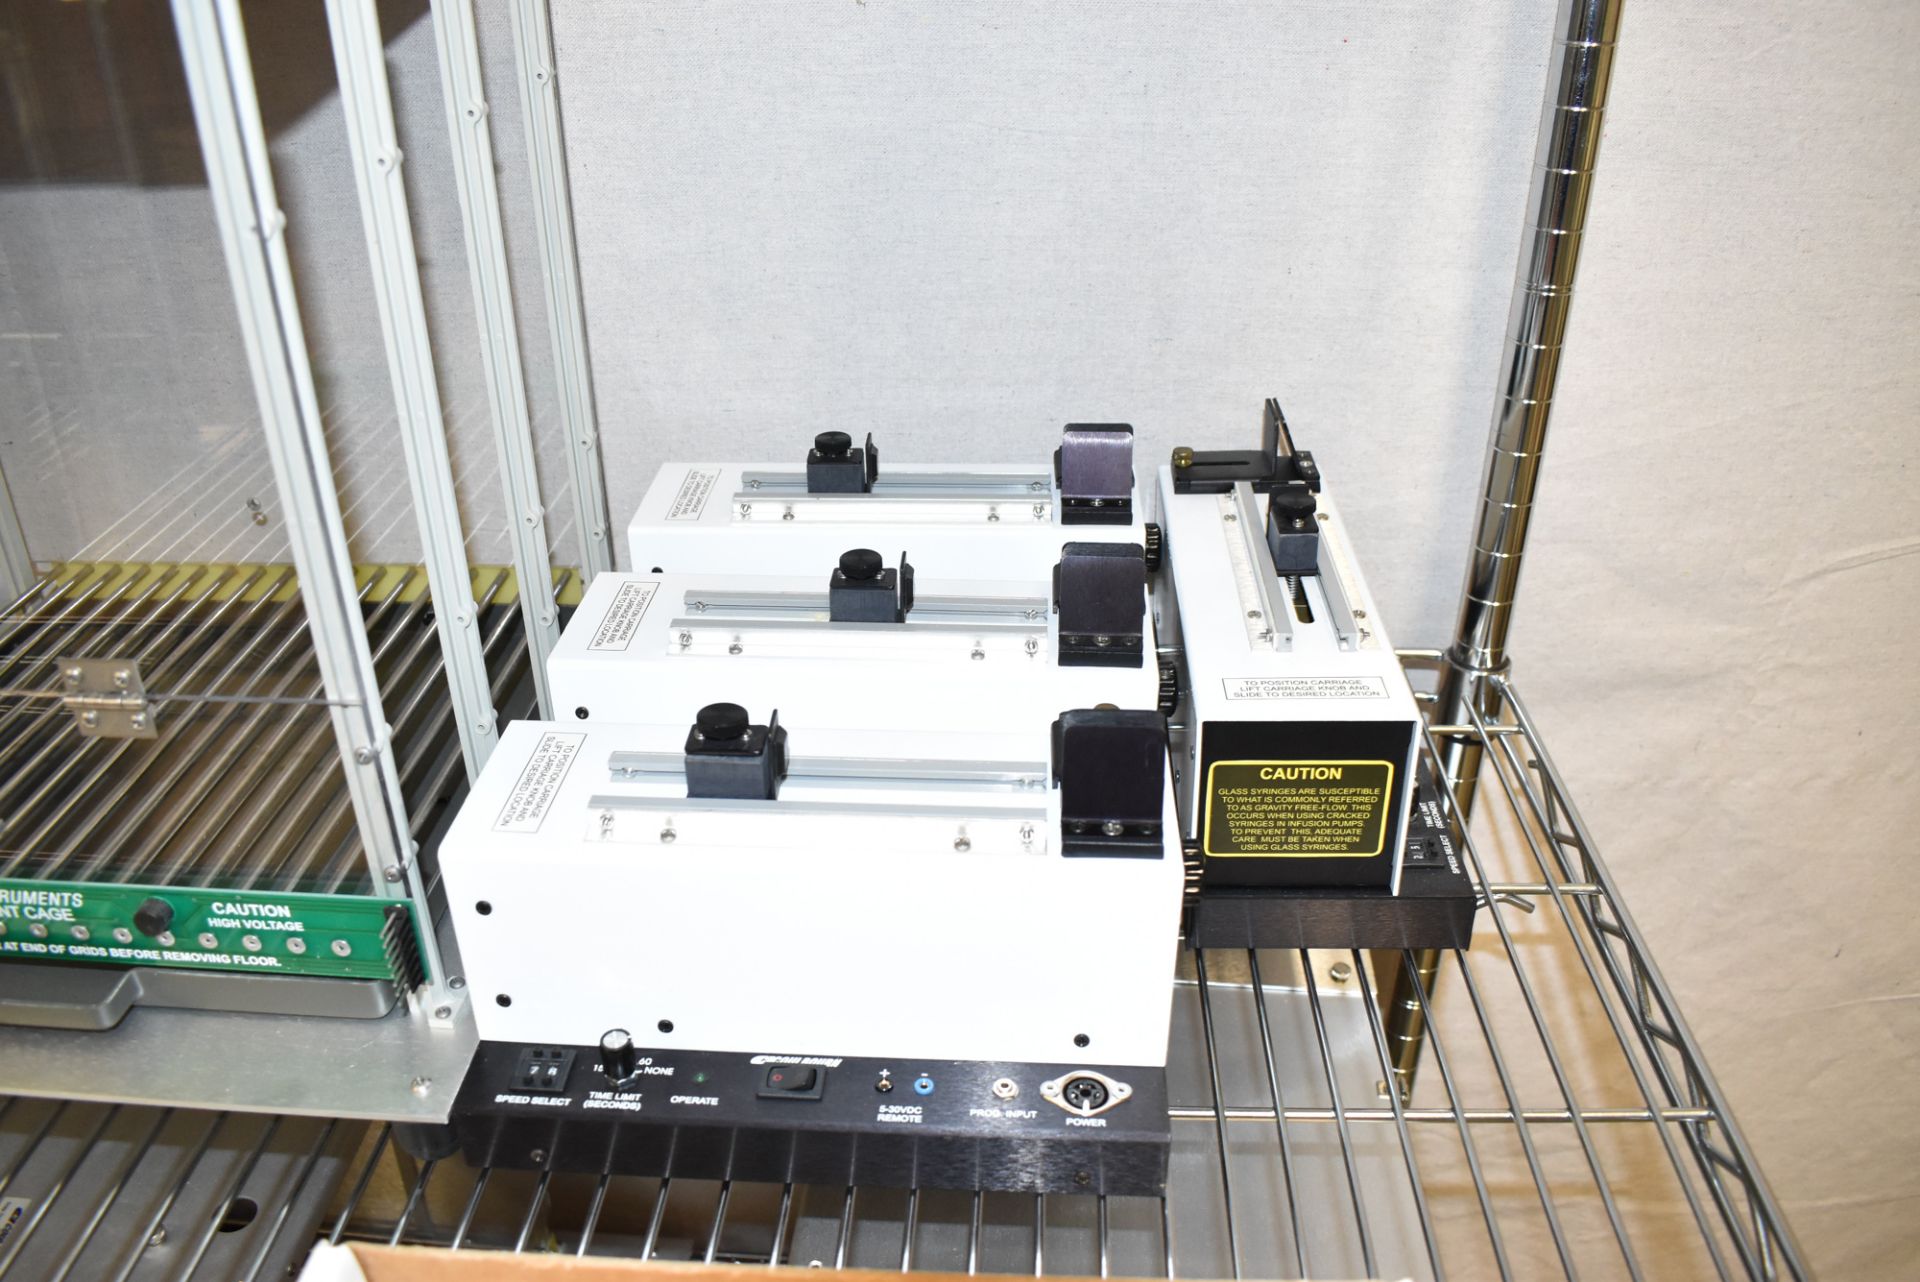 LOT/ COULBOURN BEHAVIORAL TESTING SYSTEM INCLUDING MODULES AND COMPONENTS, COMPUTER SYSTEM, TRIGGERS - Image 10 of 14